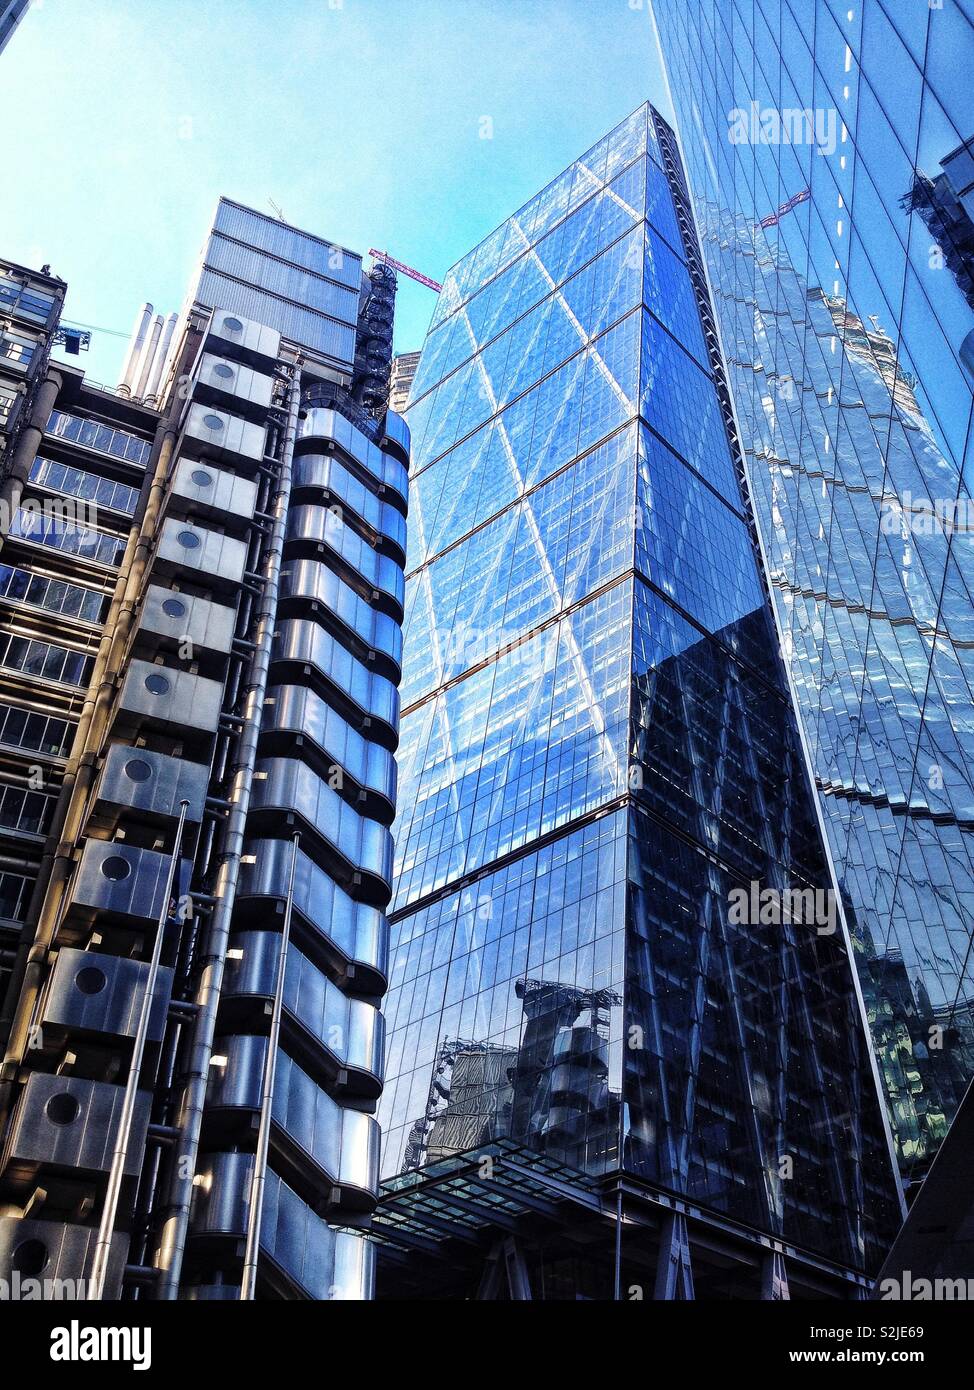 Glass and stainless steel, the Lloyds and Leadenhall buildings, modern  architecture in the City of London, England, UK Stock Photo - Alamy